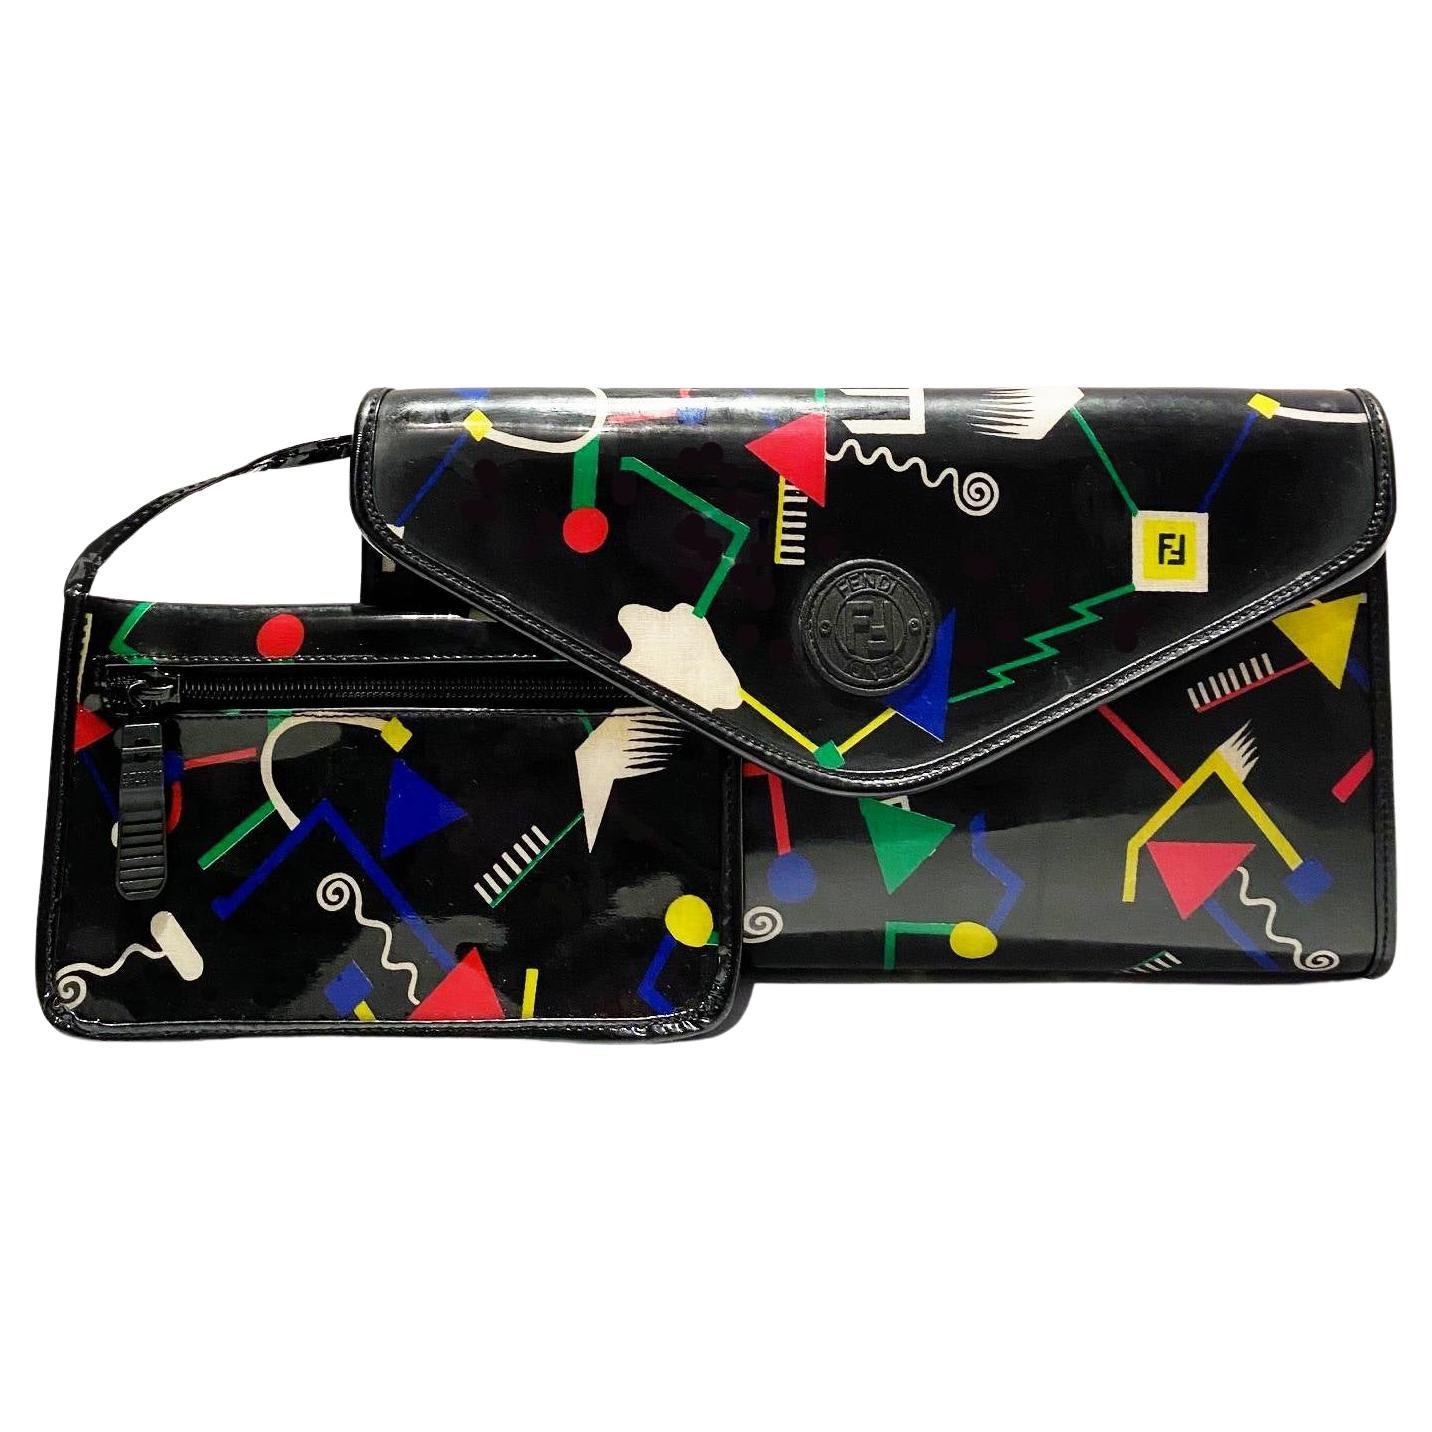 Rare Fendi envelope bag from the 80's, pop abstract print on vinyl canvas, strap closure, internal coin zipped purse.

Condition: 1980s, vintage excellent 

Measurements: 28.5x17.5 x 8 cm